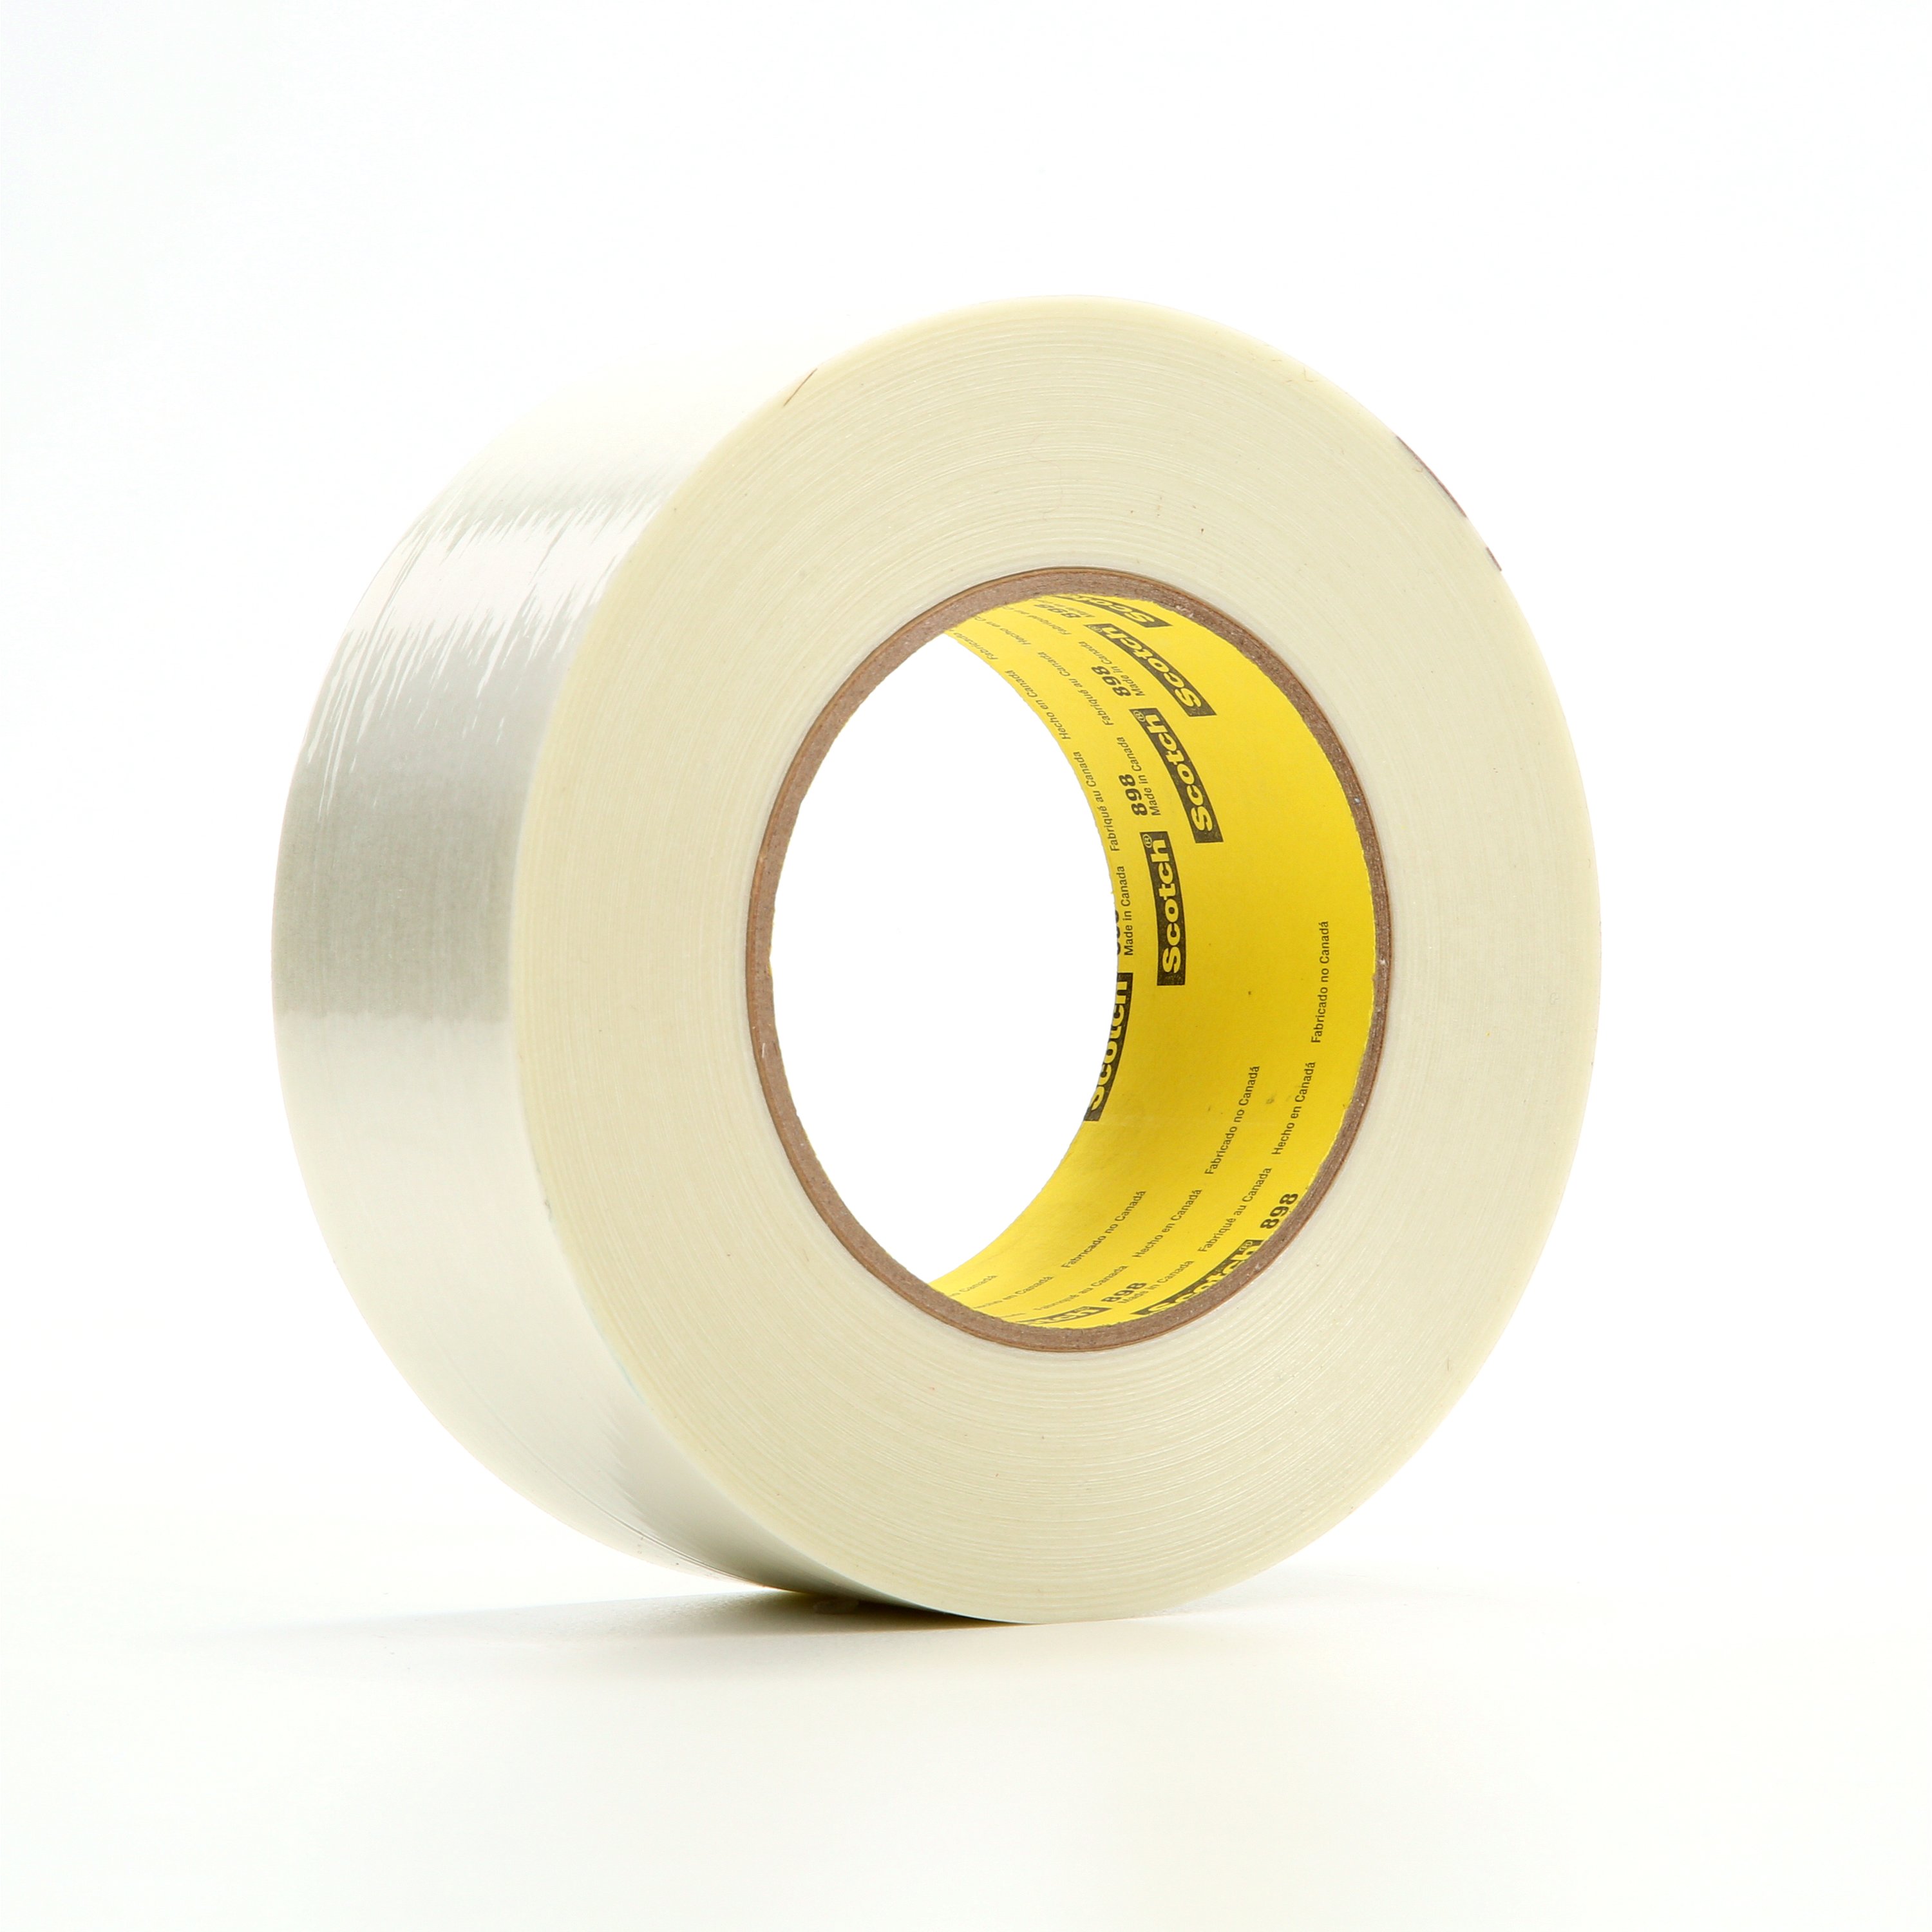 Scotch®  Filament Tape 898 provides an excellent solution for full overlap L-clip box closures, bundling pipe or reinforcing large bulk containers.